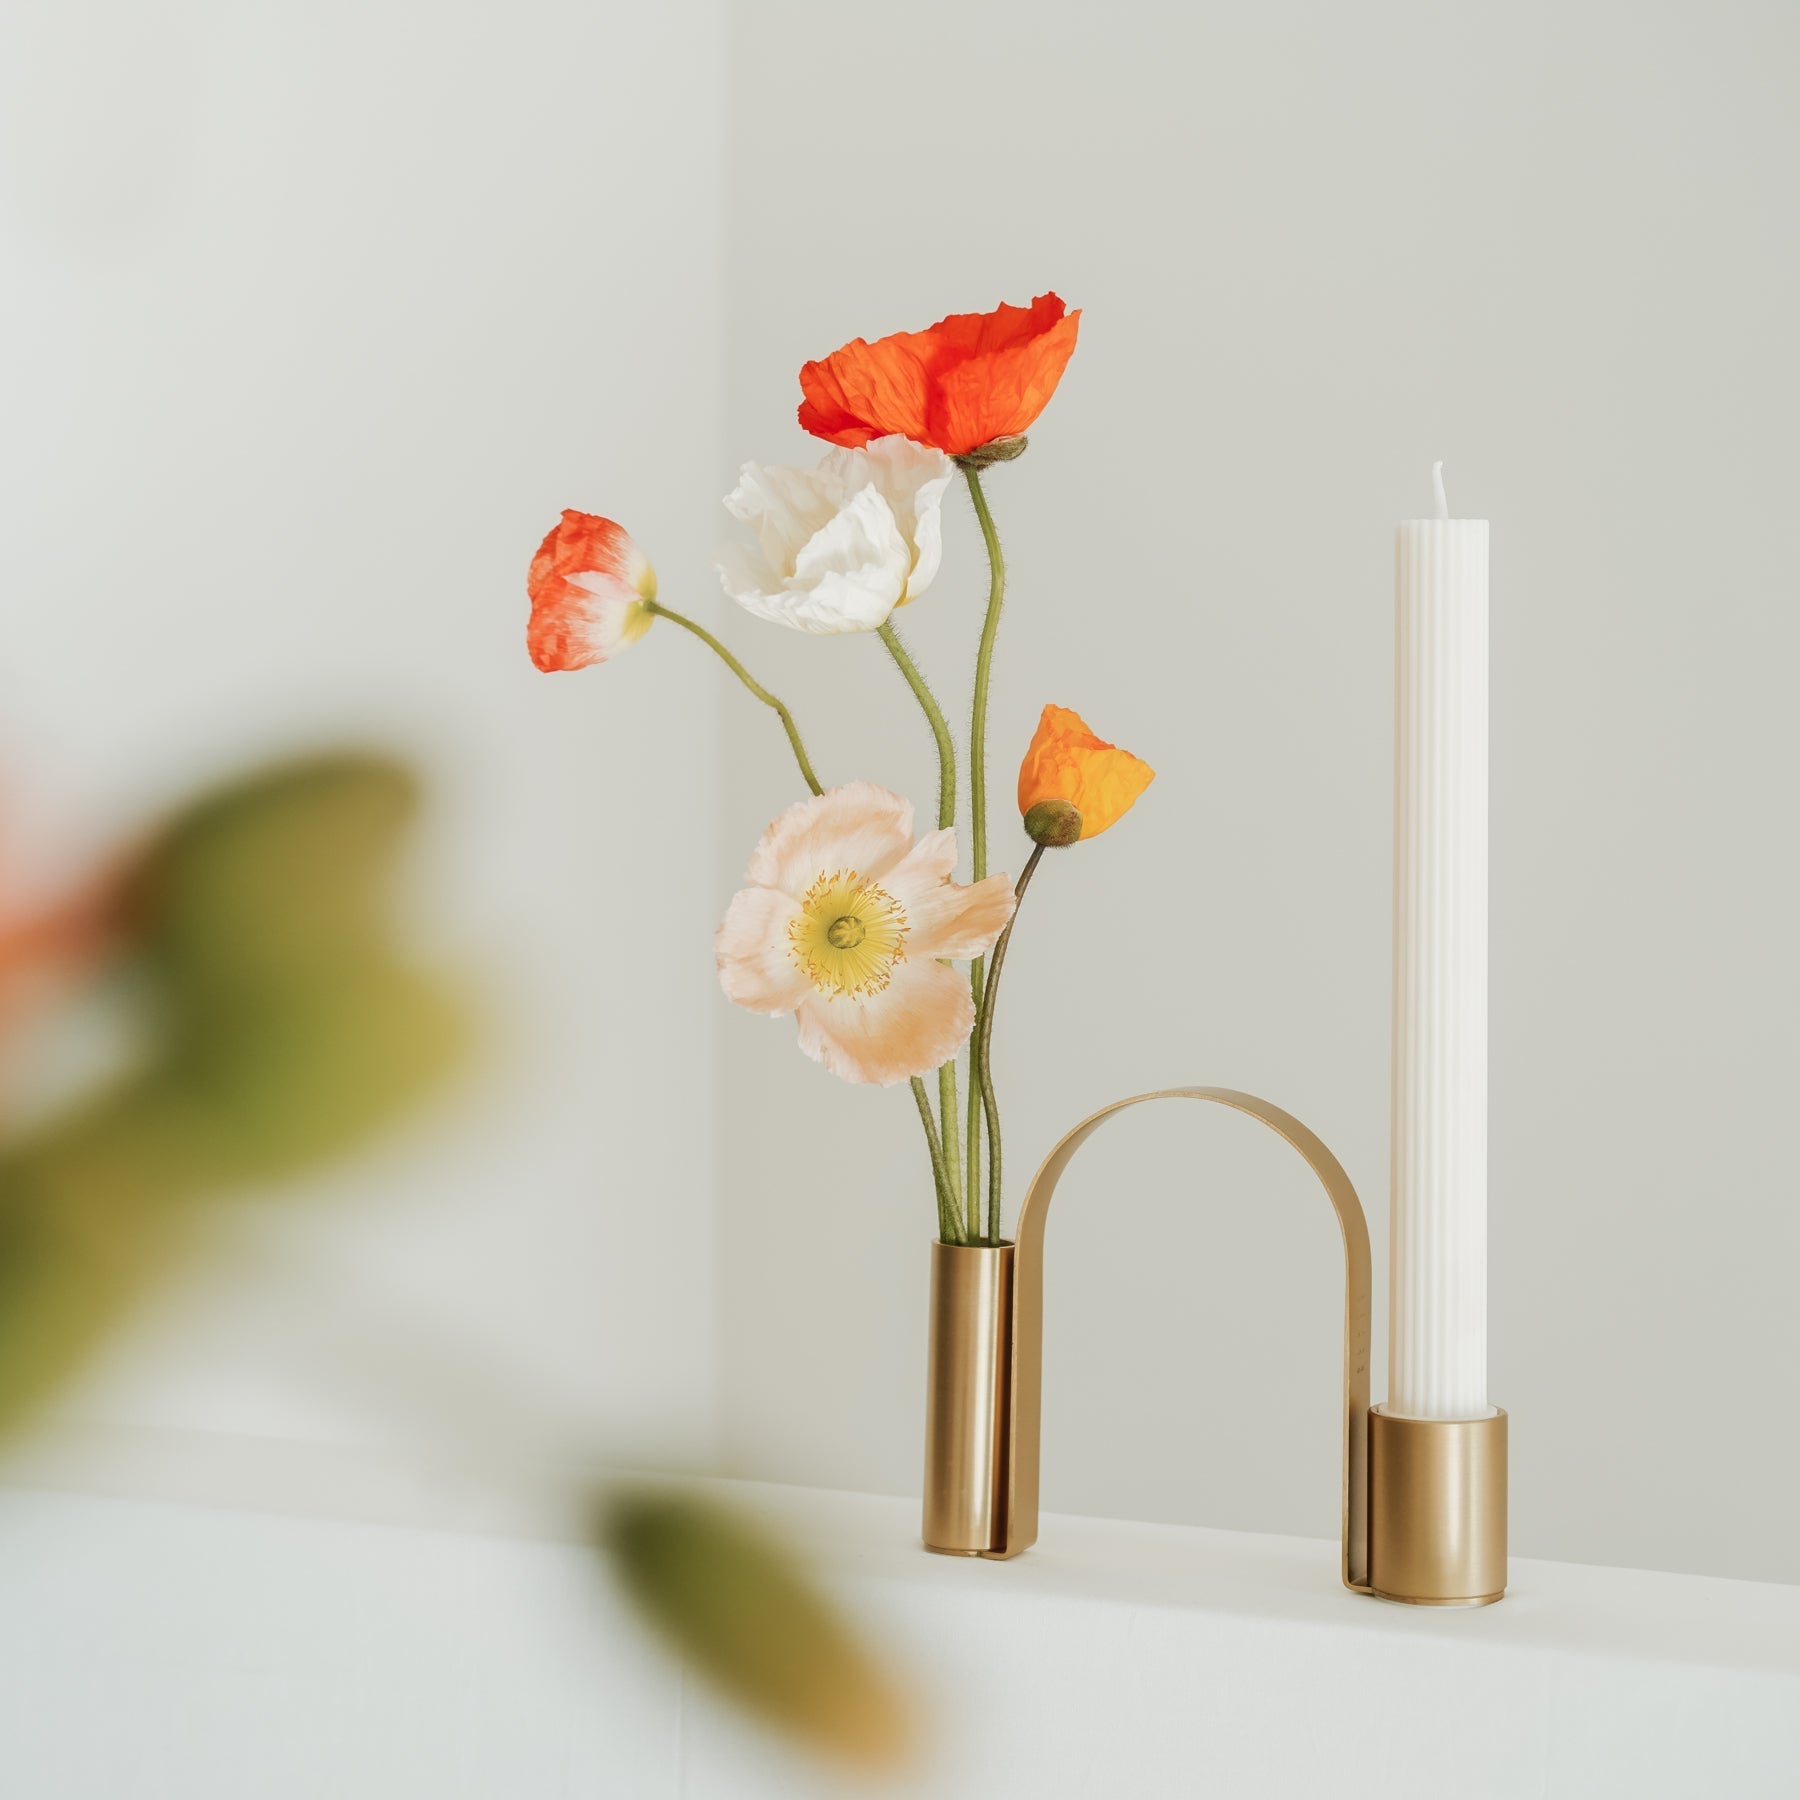 The Arch Brass Holder adds instant graphic appeal to a room. More than just a candle holder, the gently curved arch-like stand can be used as a vase to bring elegance and visual intrigue to spaces.